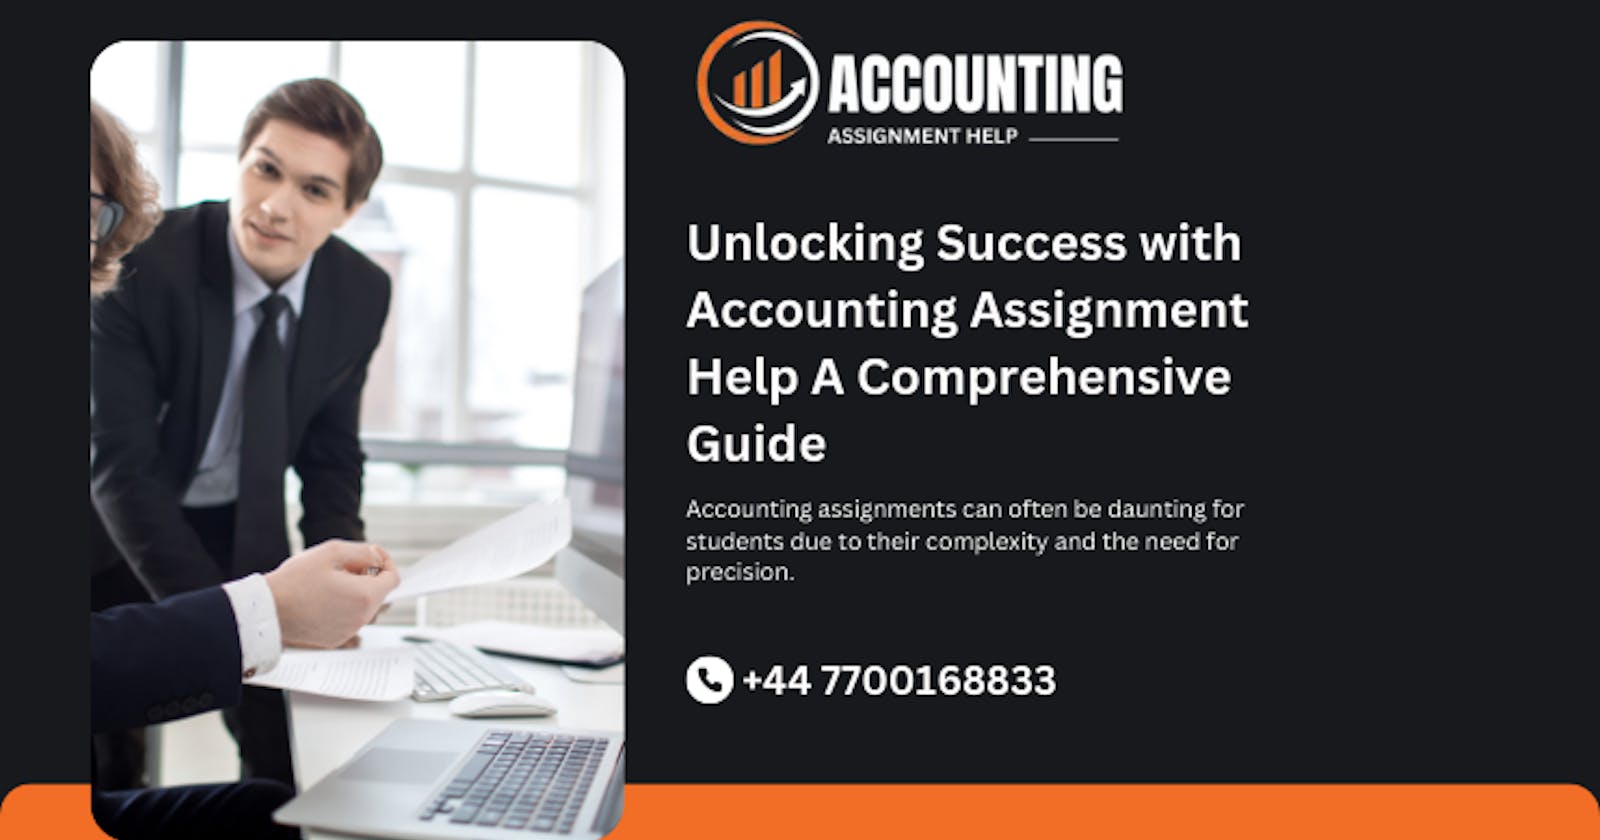 Unlocking Success with Accounting Assignment Help A Comprehensive Guide